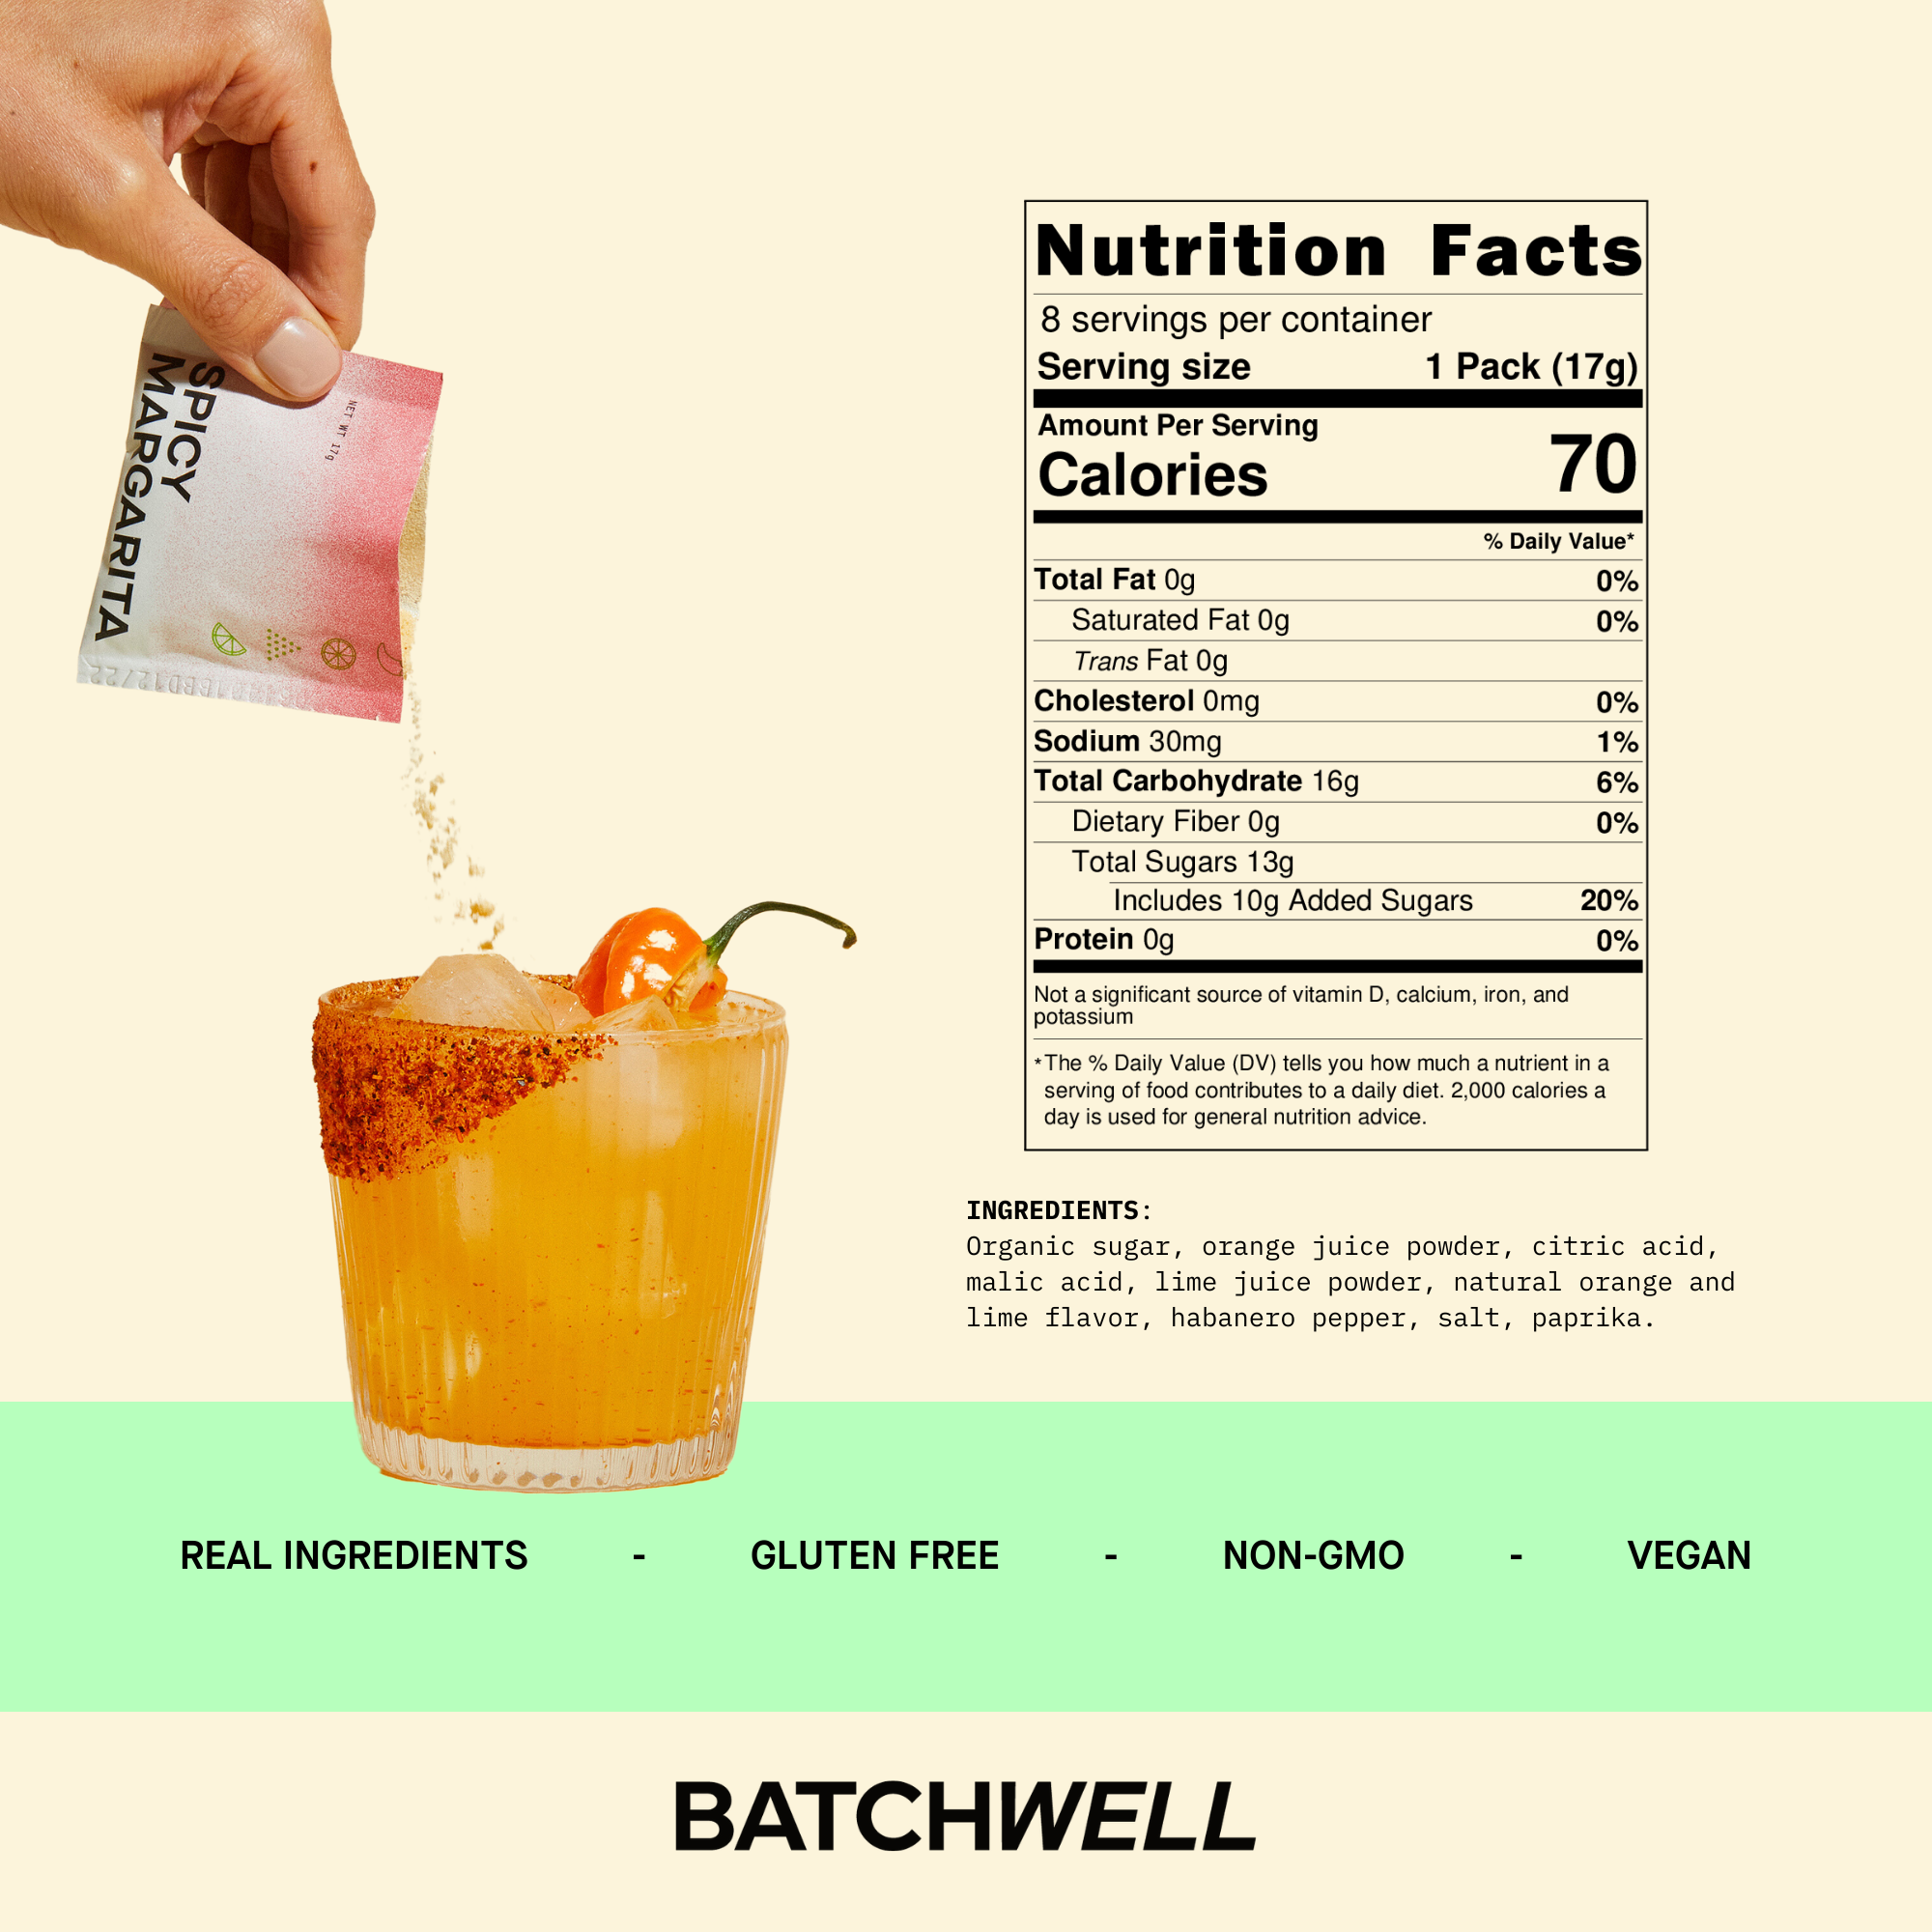 Spicy margarita nutritional facts